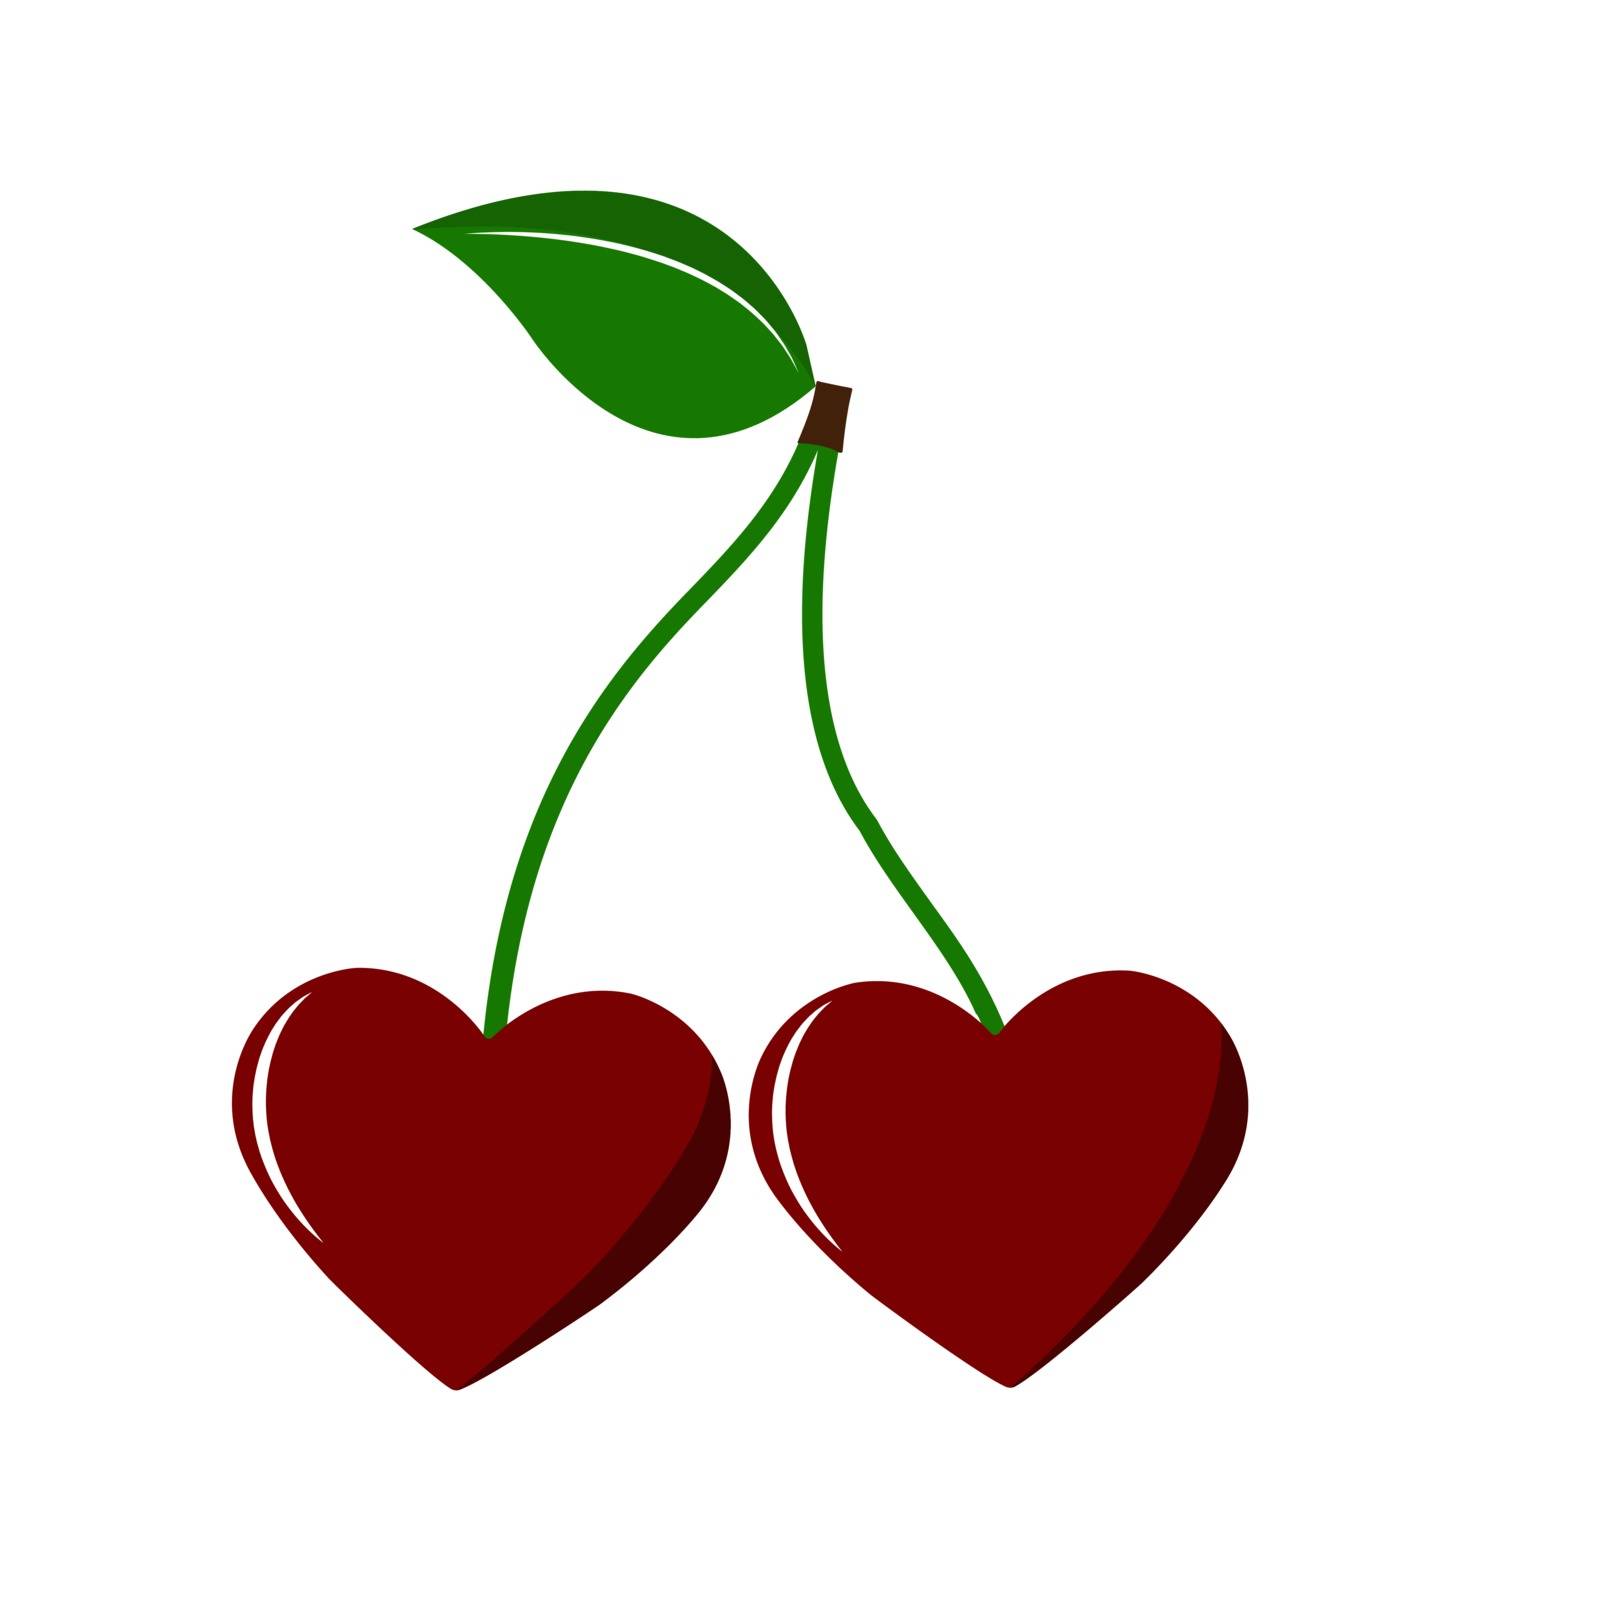 Two heart shaped berries on the stalk, flat design